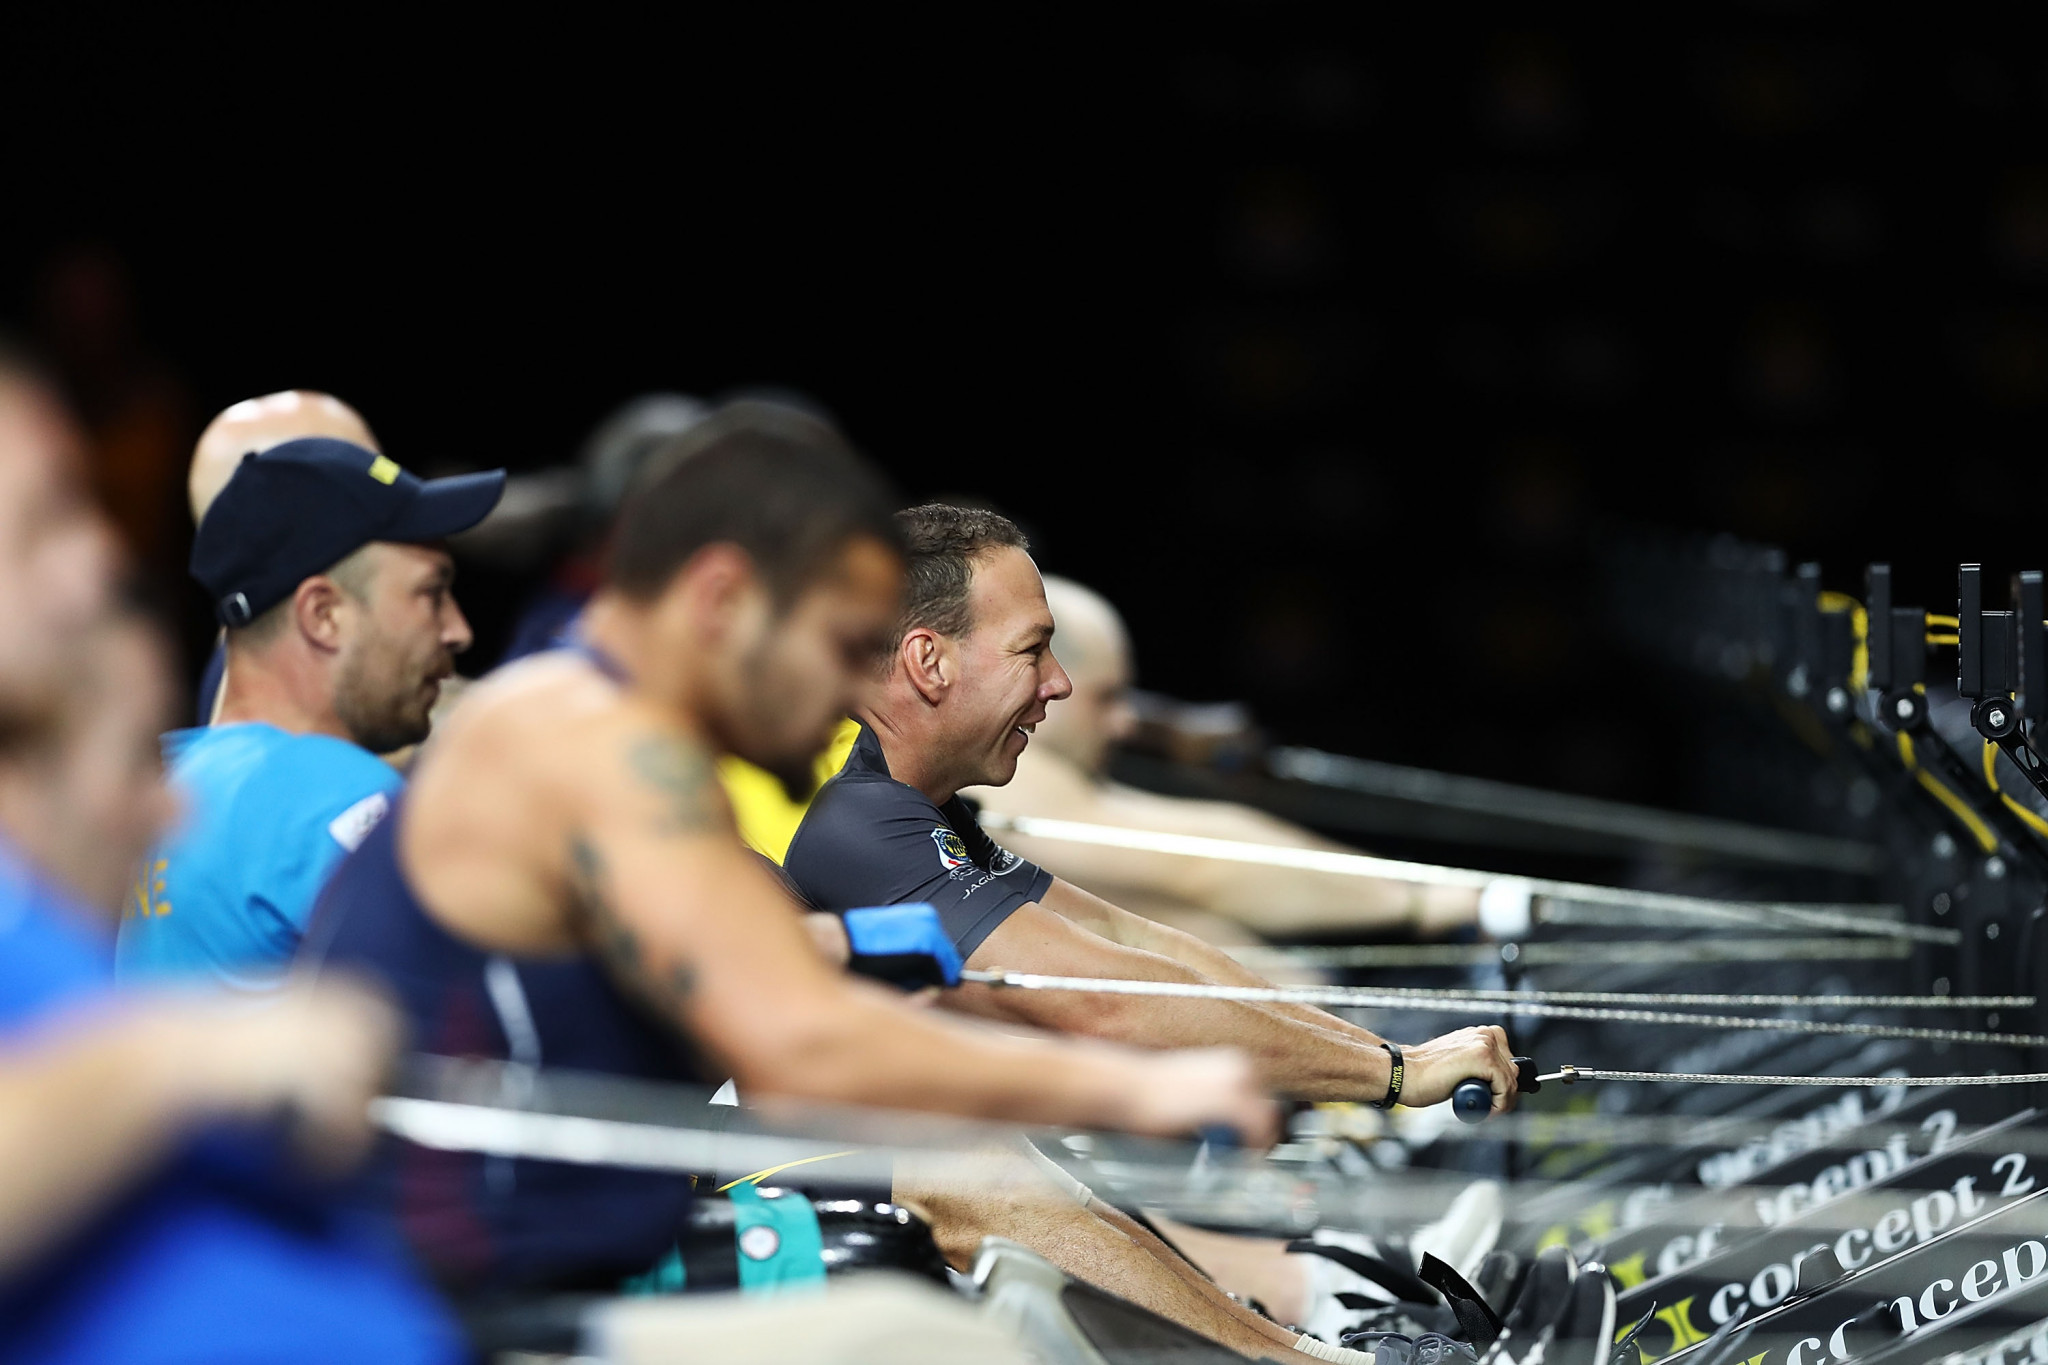 Lemmelign set to defend title at the 2022 World Rowing Virtual Indoor Championships